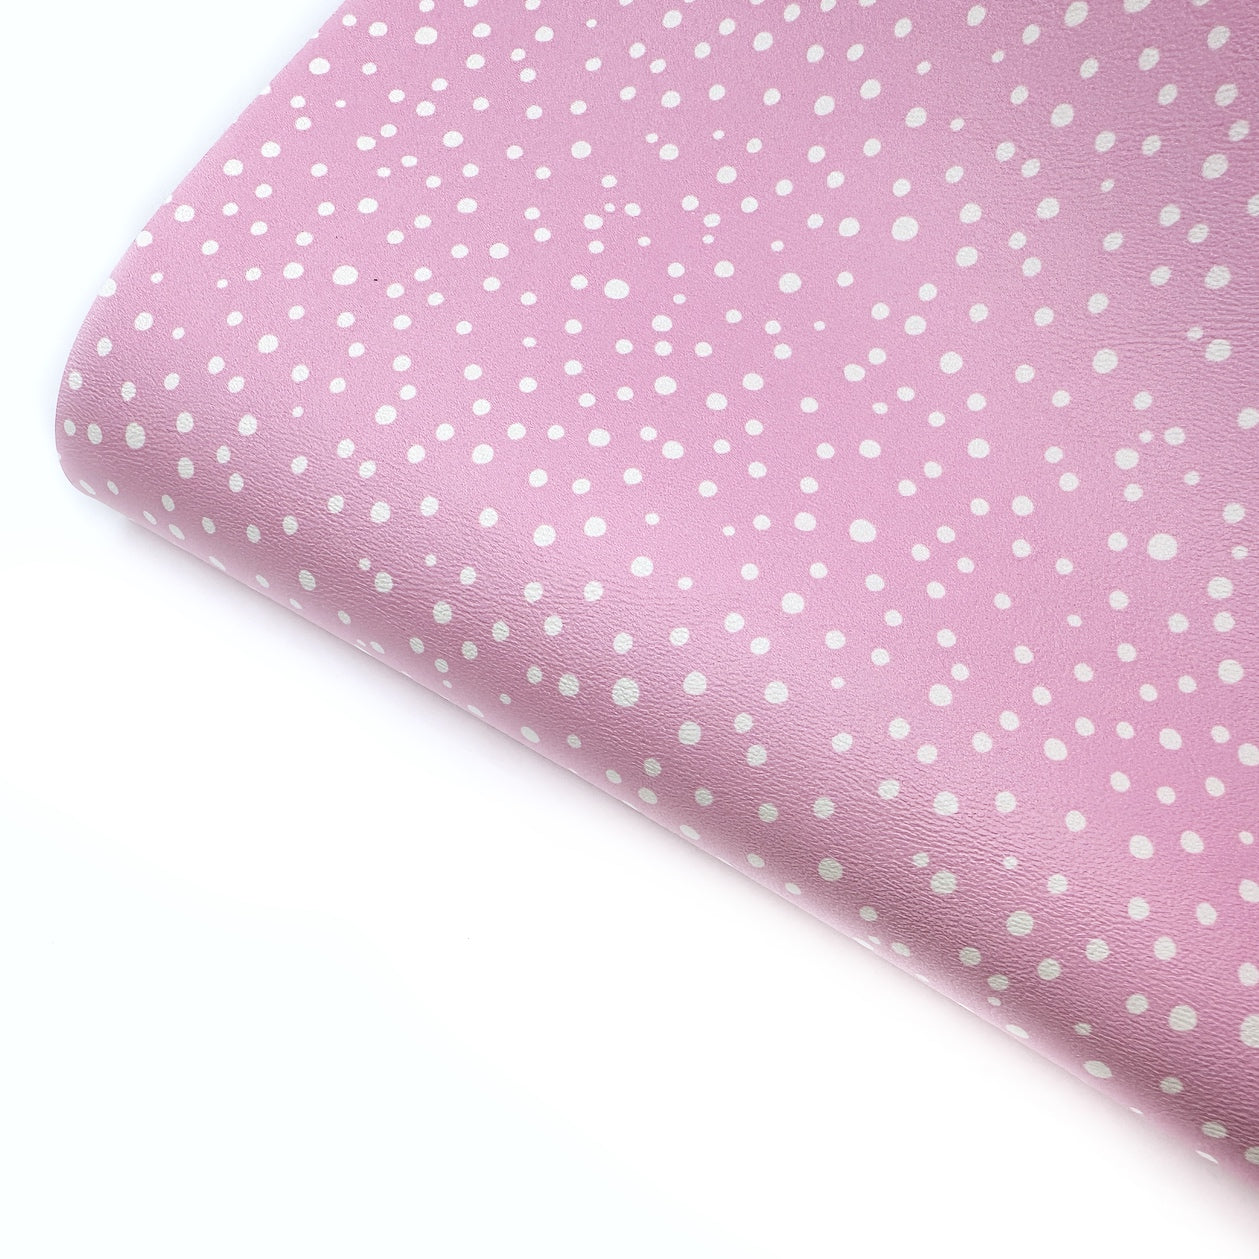 Pink Snow Drops Premium Faux Leather Fabric Sheets